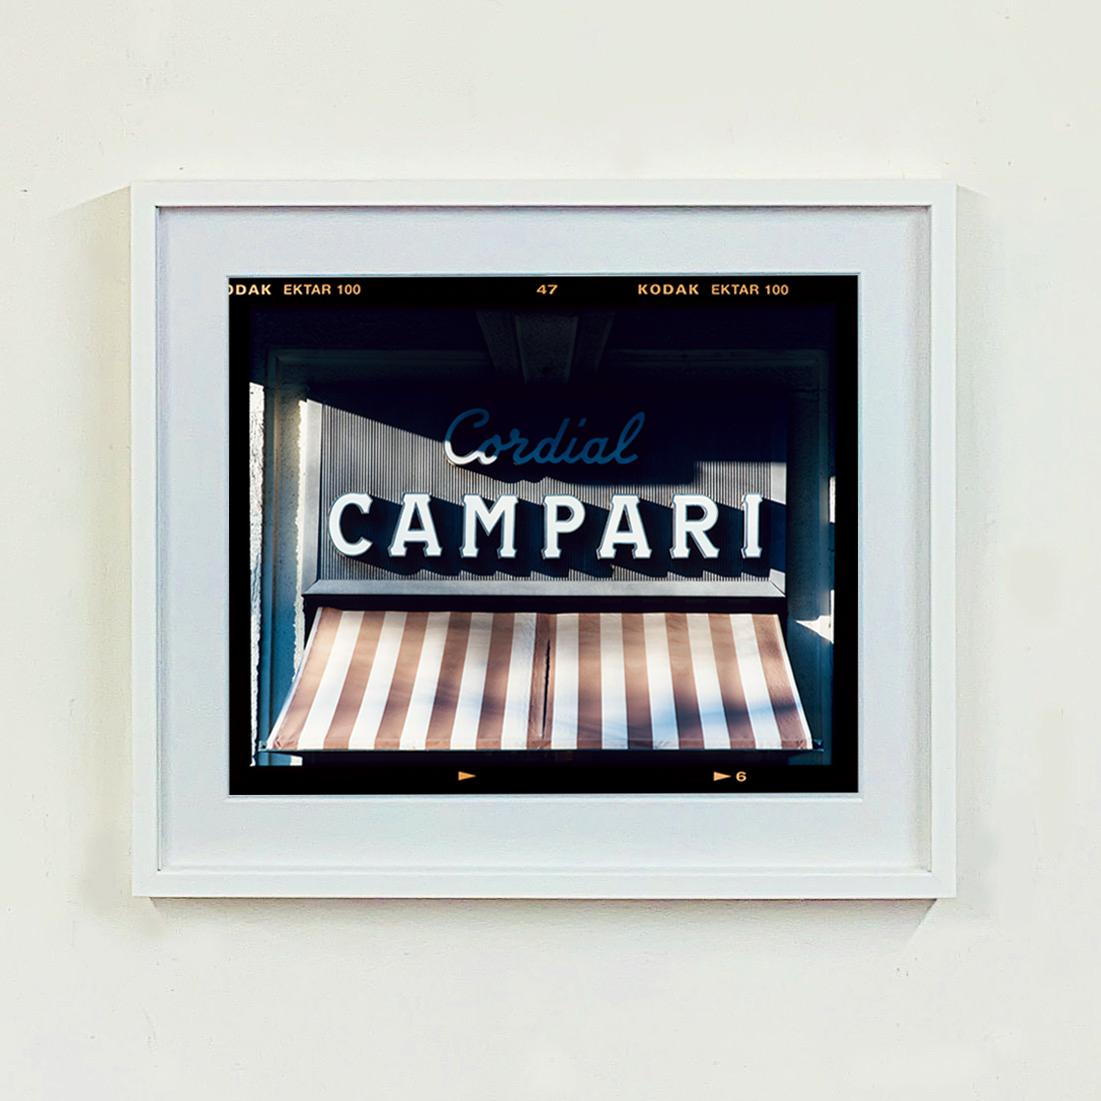 Cordial Campari, photograph from from Richard Heeps series, 'A Short History of Milan' which began in November 2018 for a special project featuring at the Affordable Art Fair Milan 2019 and the series is ongoing.

There is a reoccurring linear,